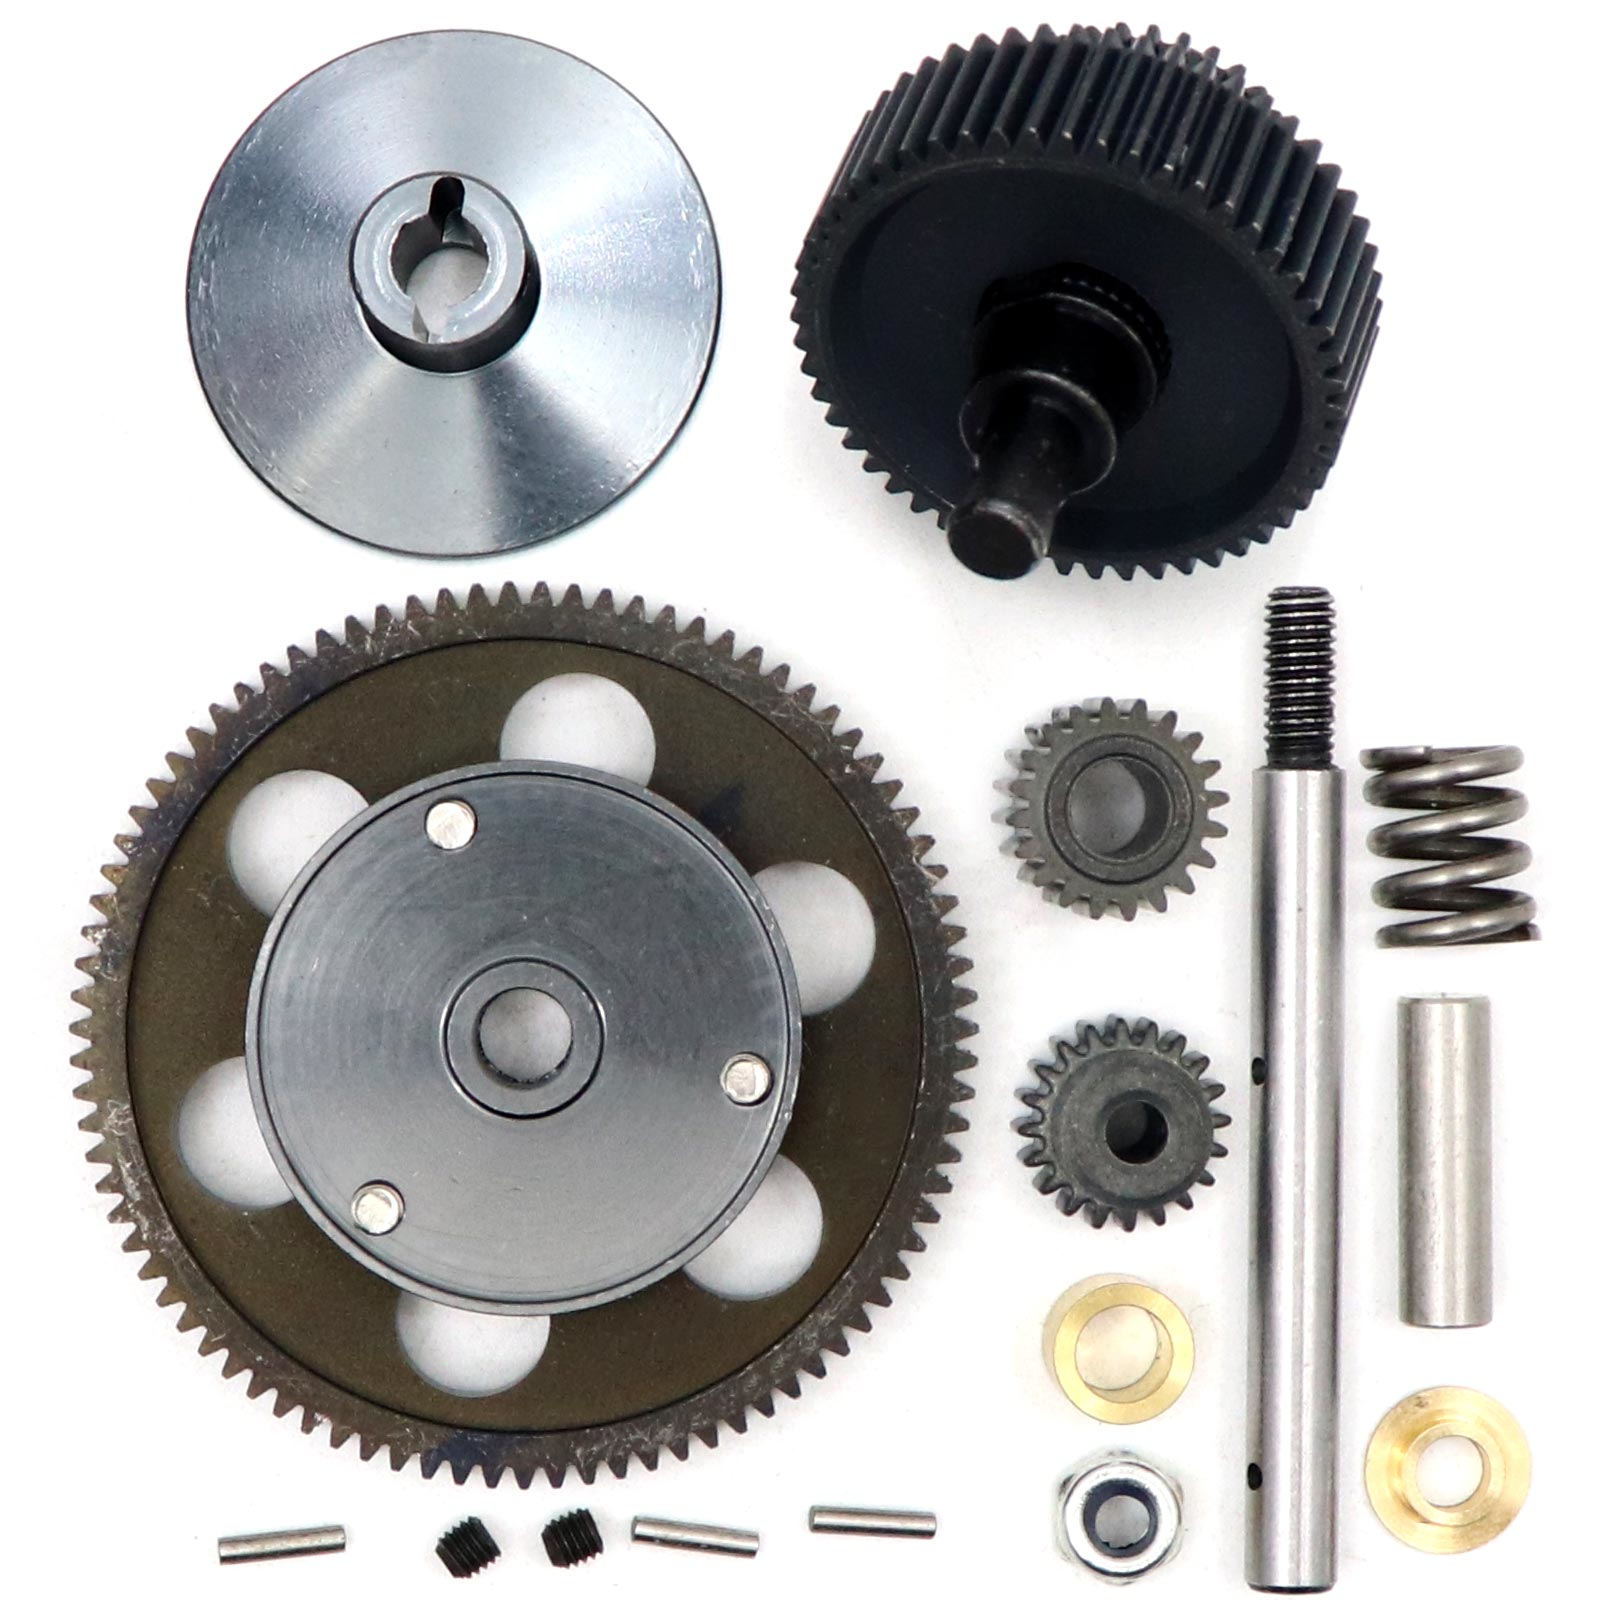 Details about   Black Heavy Duty Steel Transmission Gear Set For 1/10 RC Car Axial SCX10 Gearbox